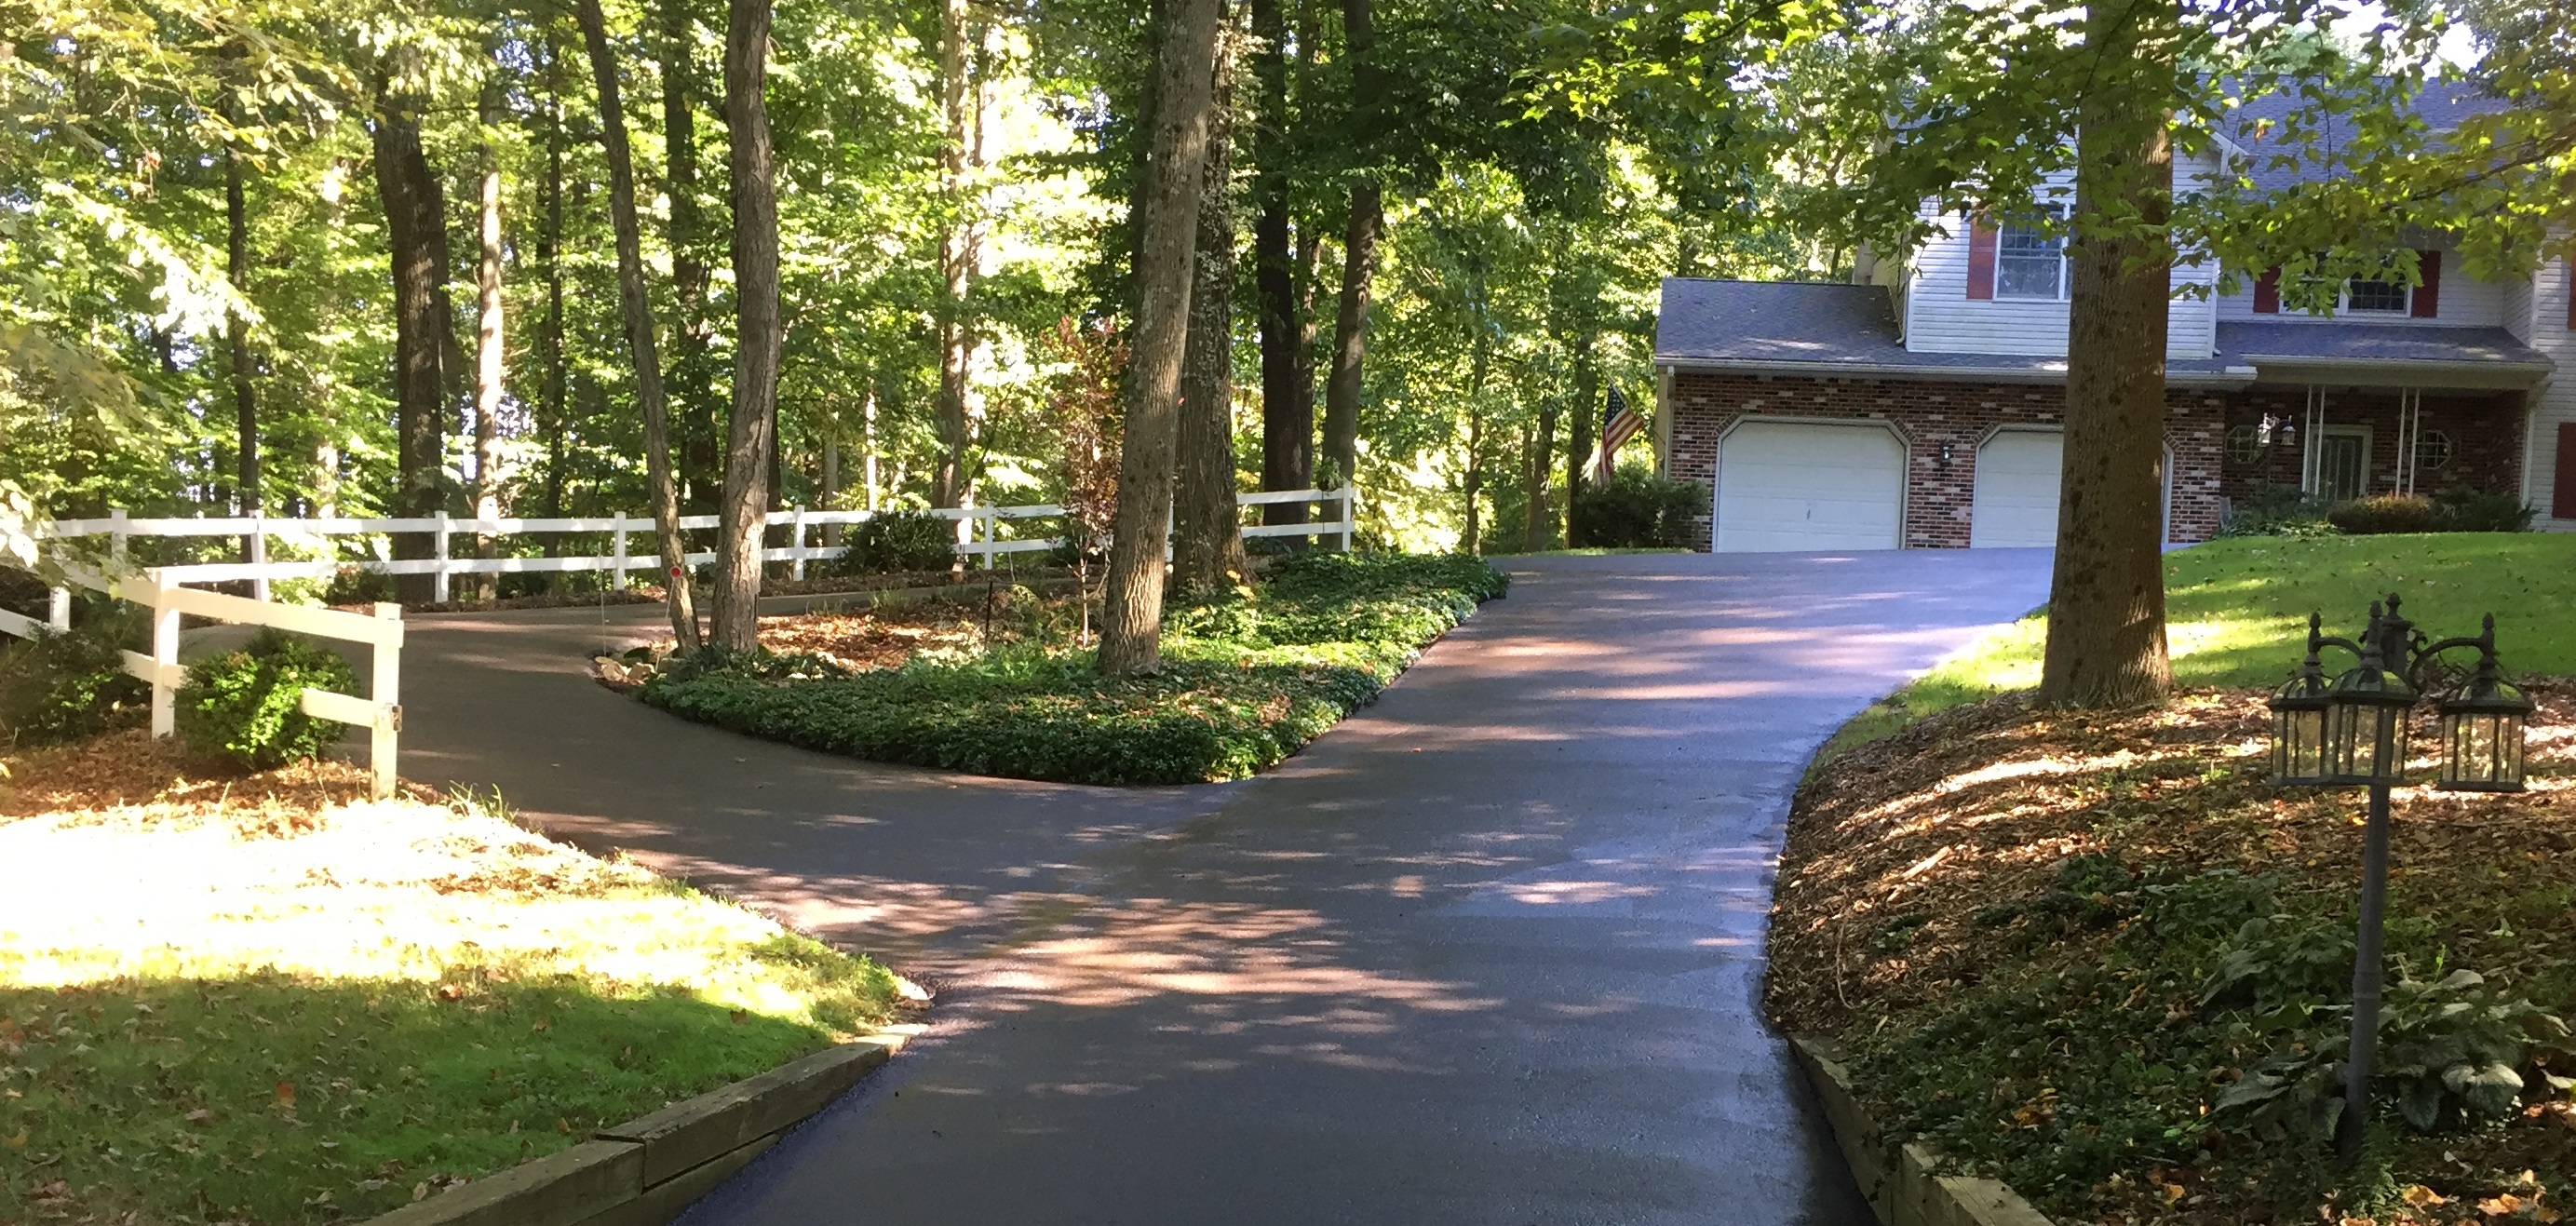 fresh sealcoated driveway. the house location is in a wooded area